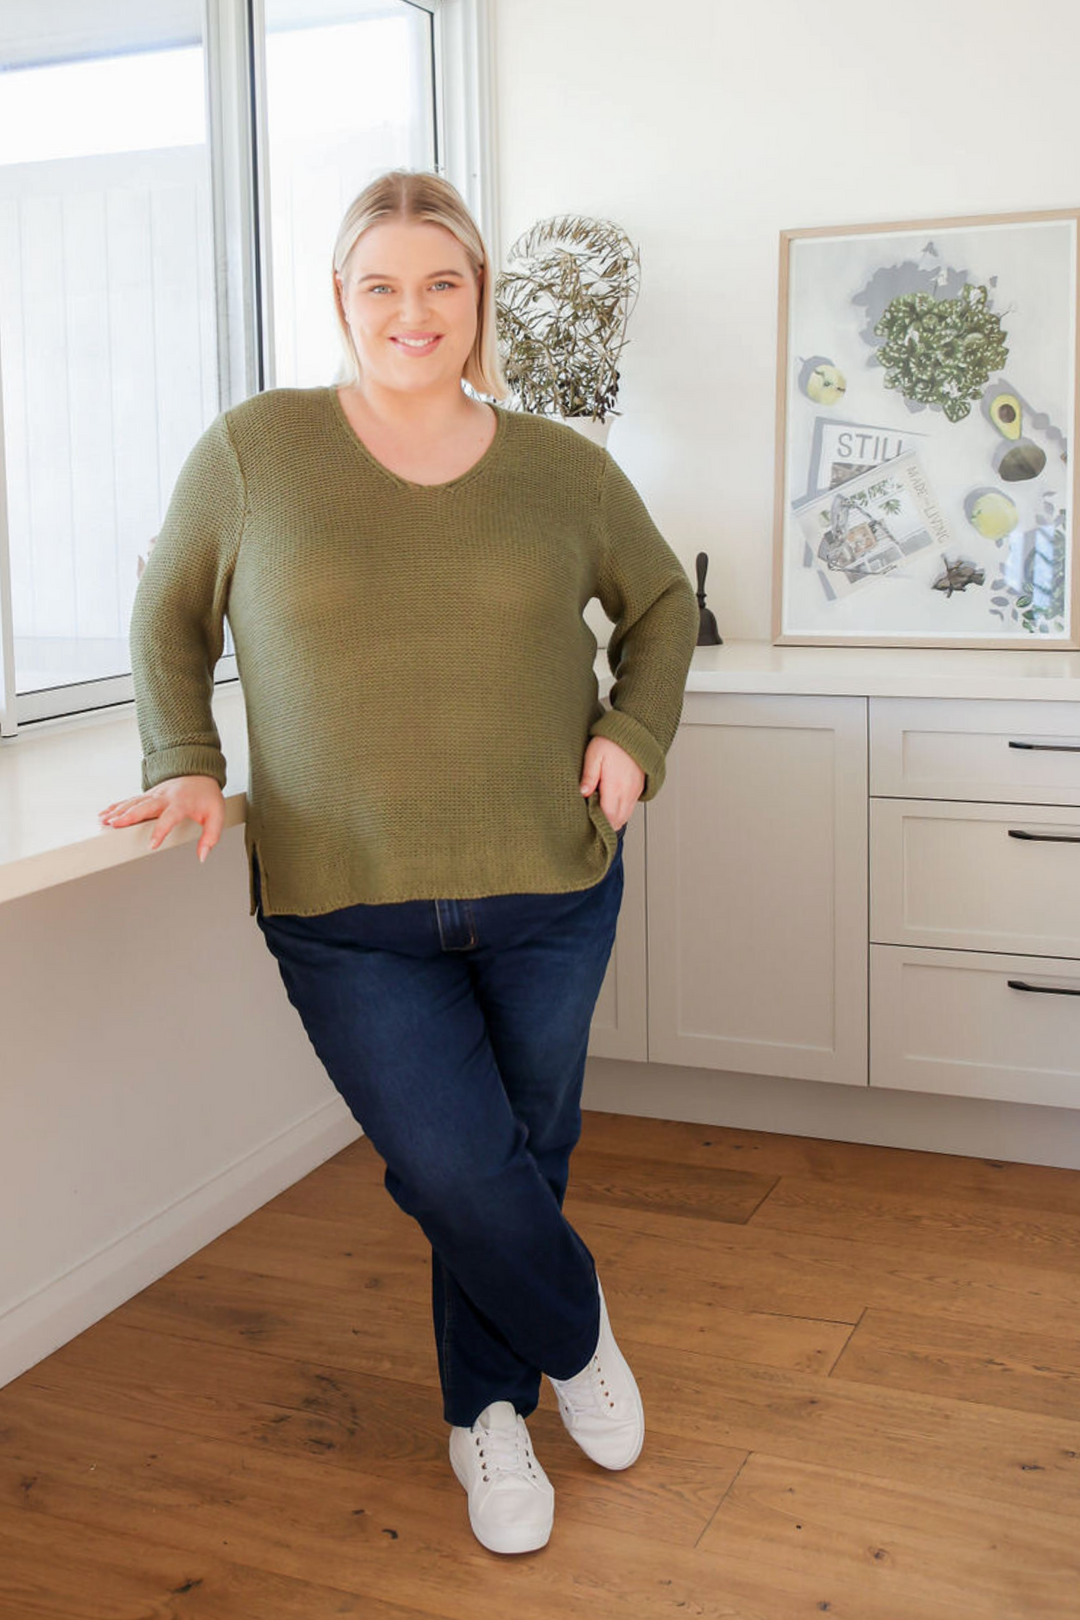 Ladies Curve Jeans - Dark Denim - Functional Front + Back Pockets = Elasticised Waistband - Sizes 12 - 24 - Carter Curve Jeans Paired with Millie Knit Khaki - Daisy's Closet